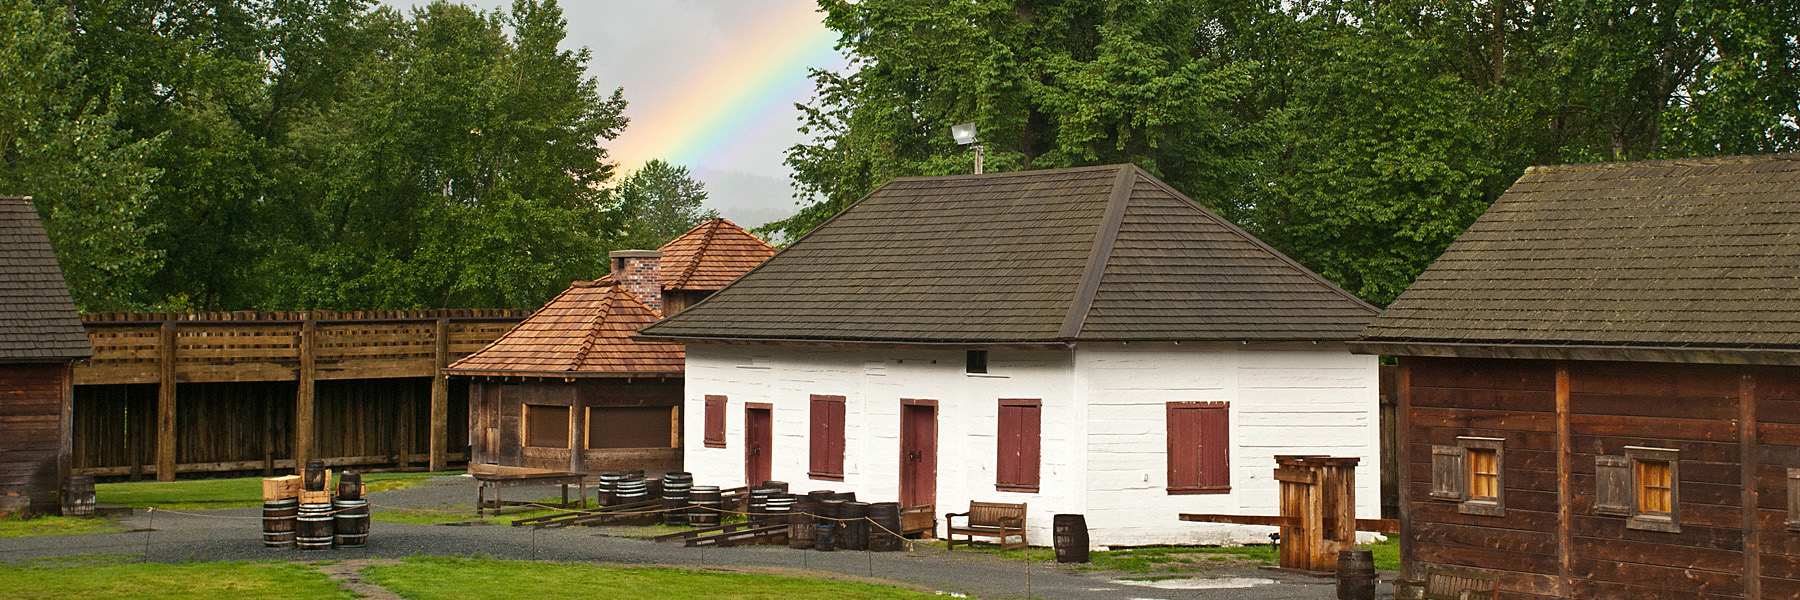 Storehouse with rainbow.